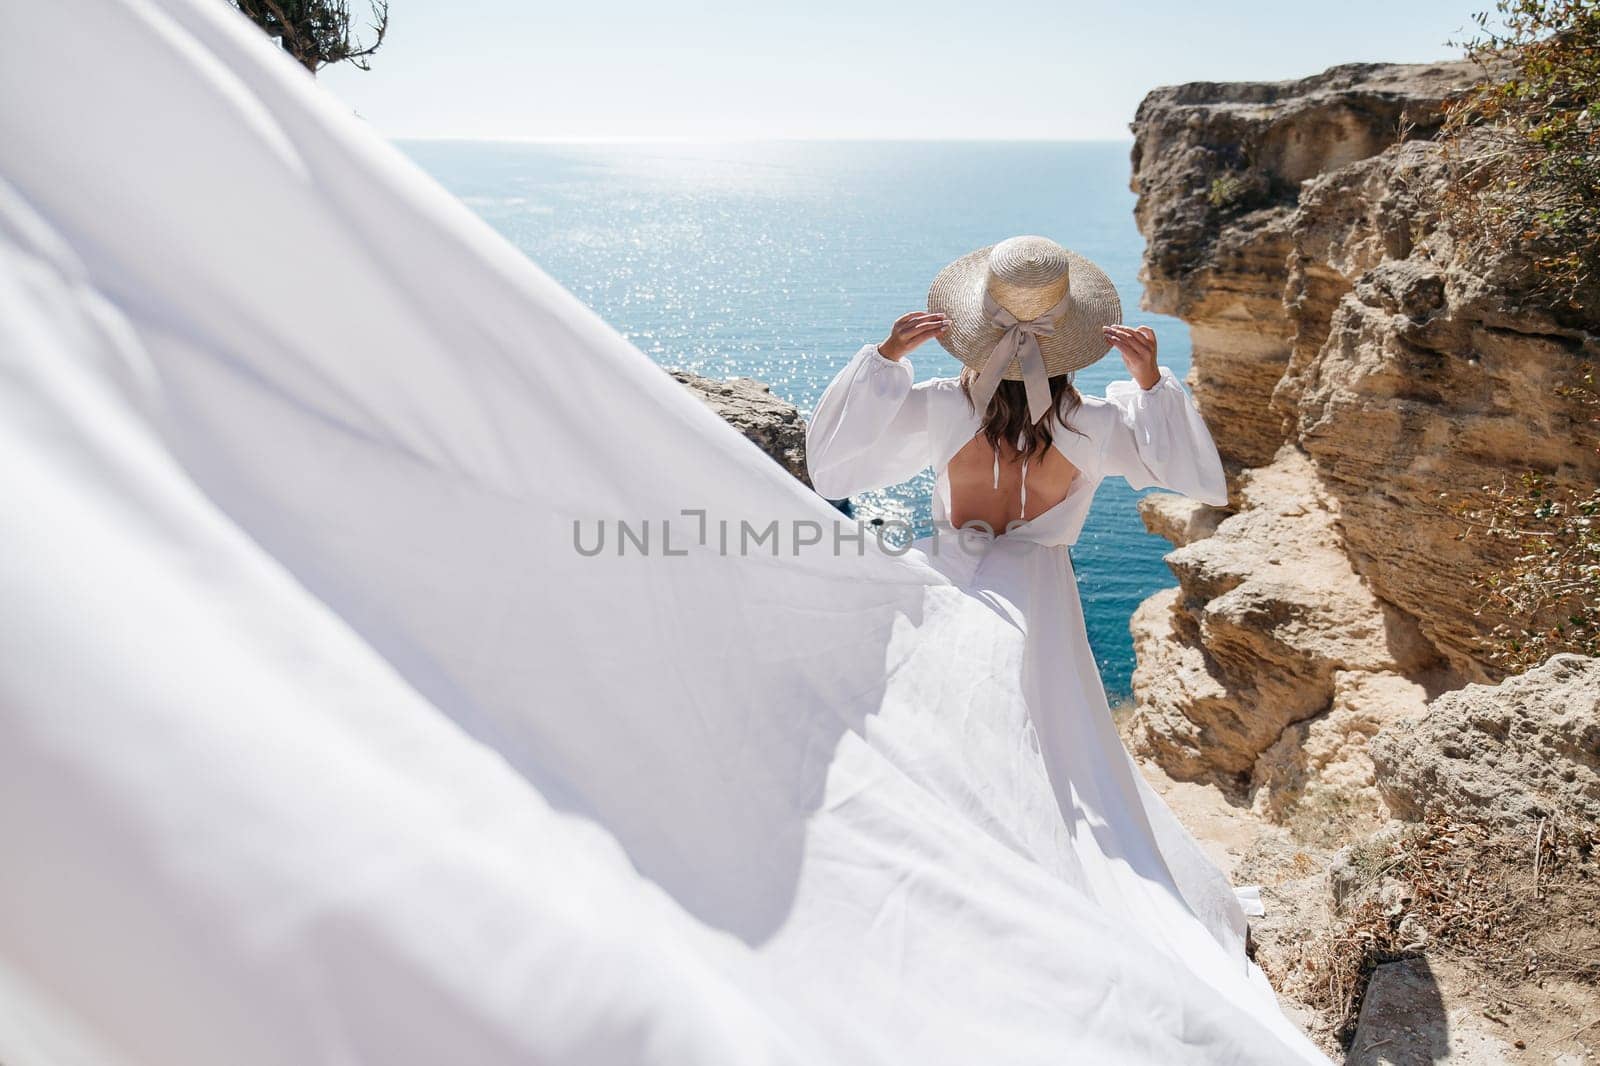 A woman in a white dress is standing on a rocky cliff overlooking the ocean. She is wearing a straw hat and she is enjoying the view